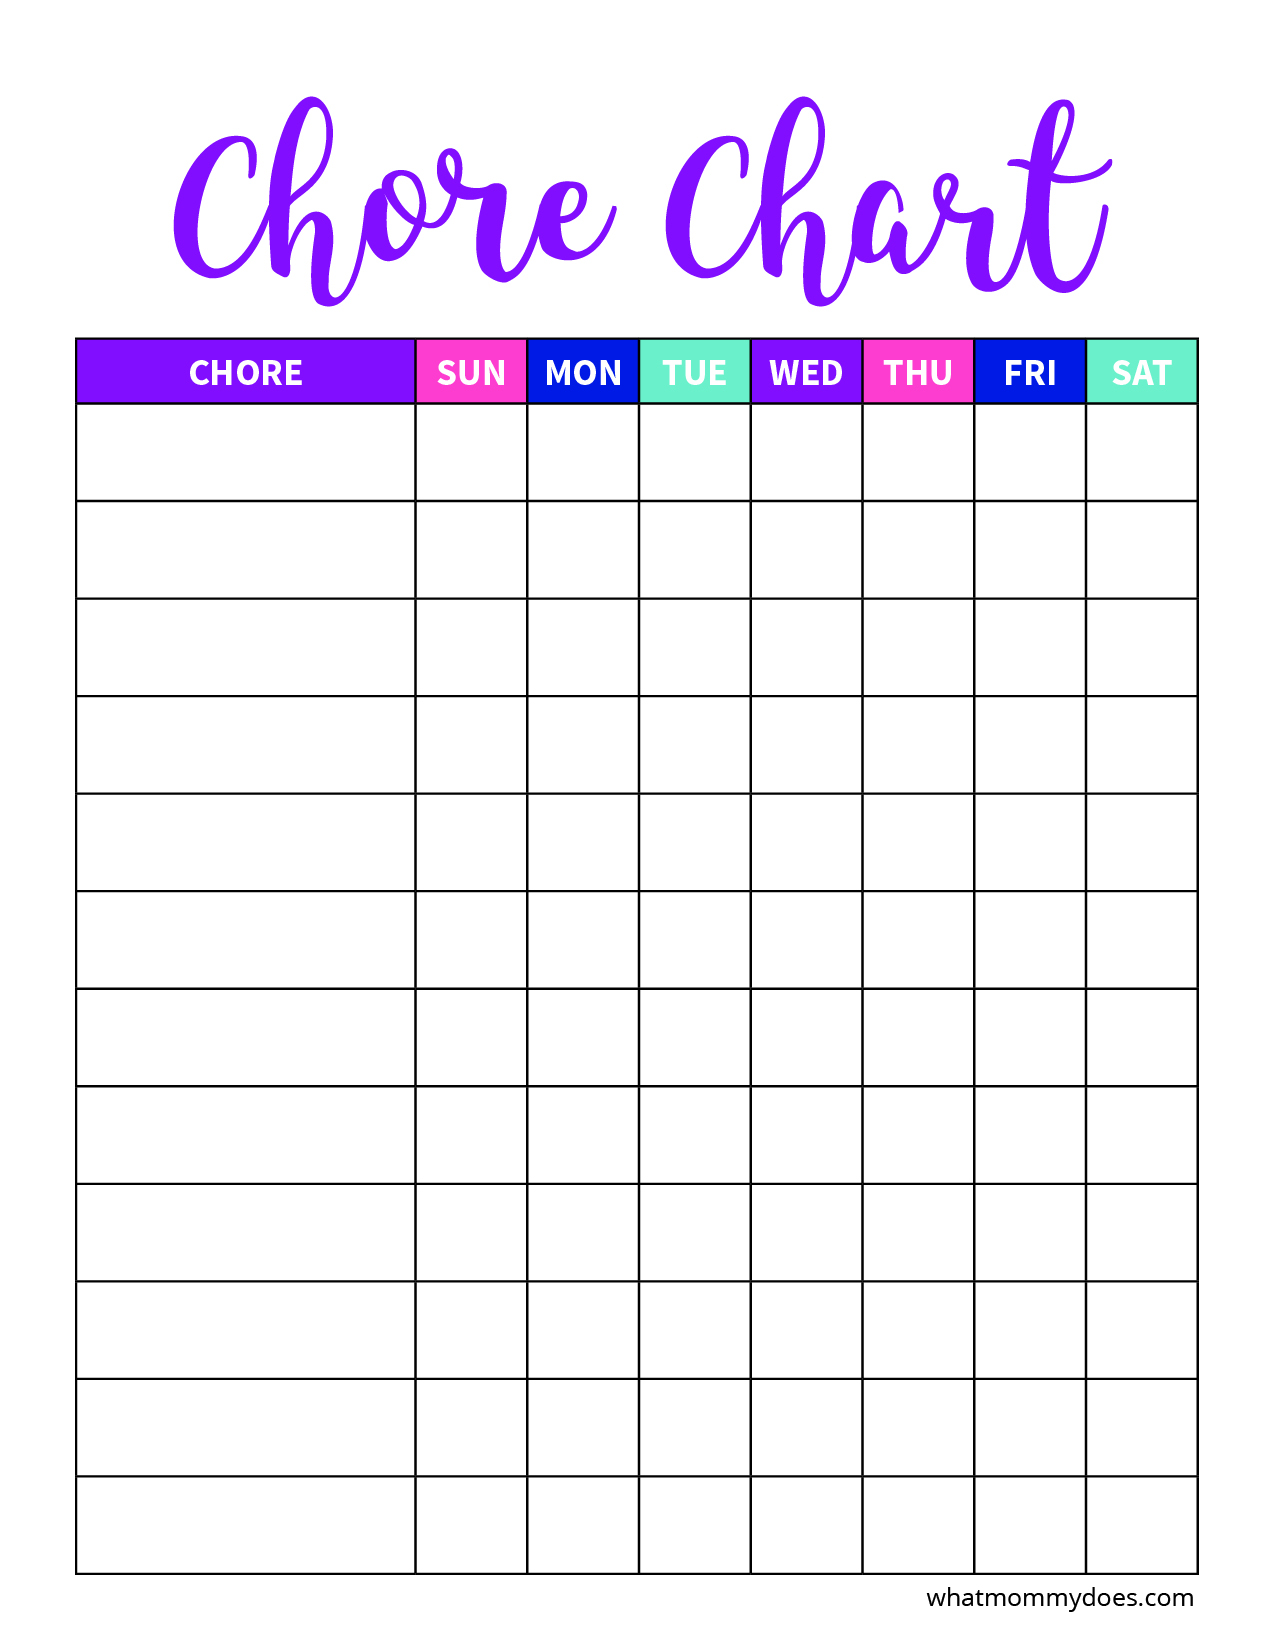 chores-chart-printable-template-business-psd-excel-word-pdf